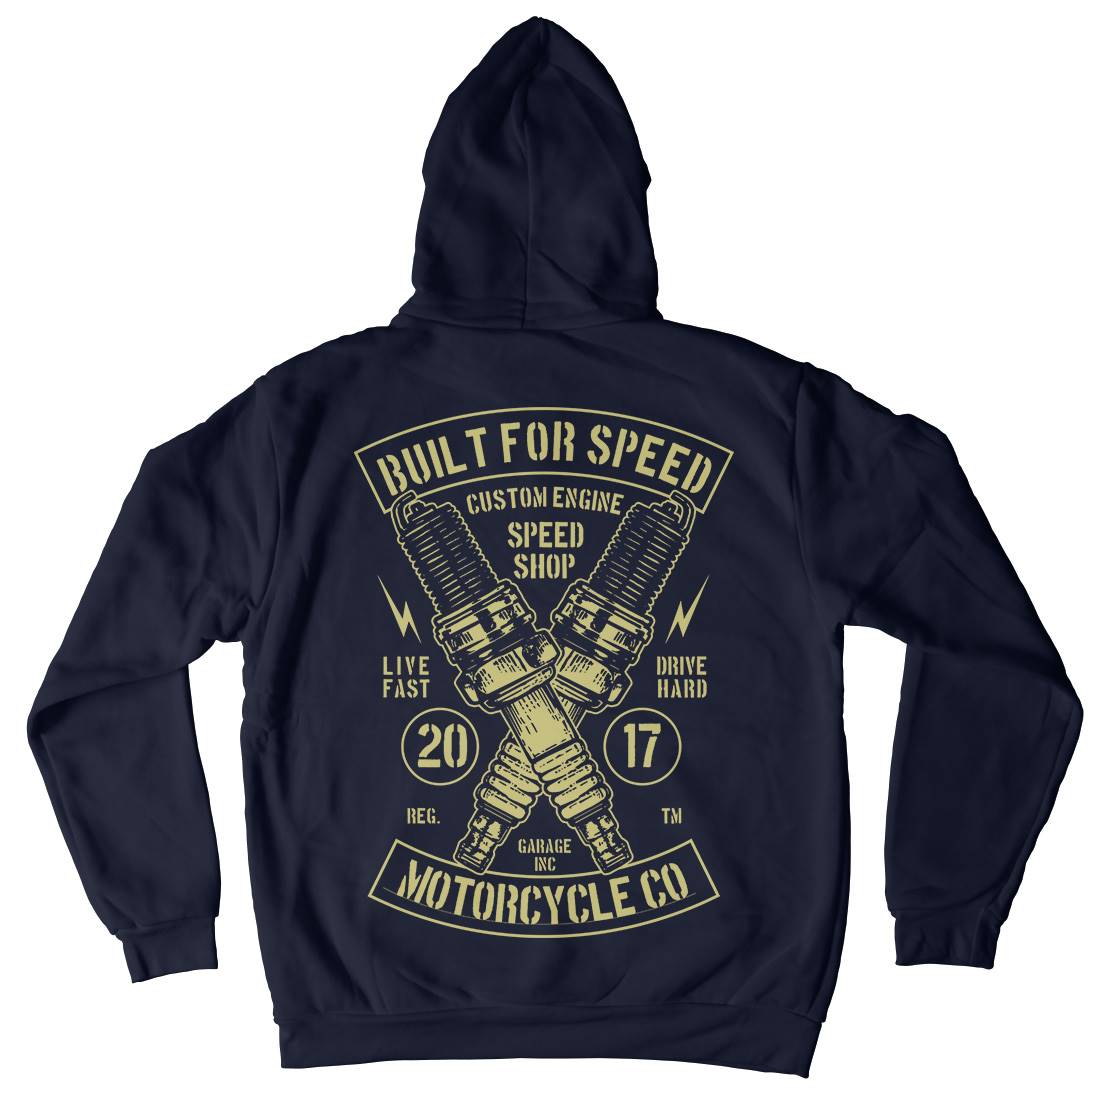 Built For Speed Mens Hoodie With Pocket Motorcycles B188